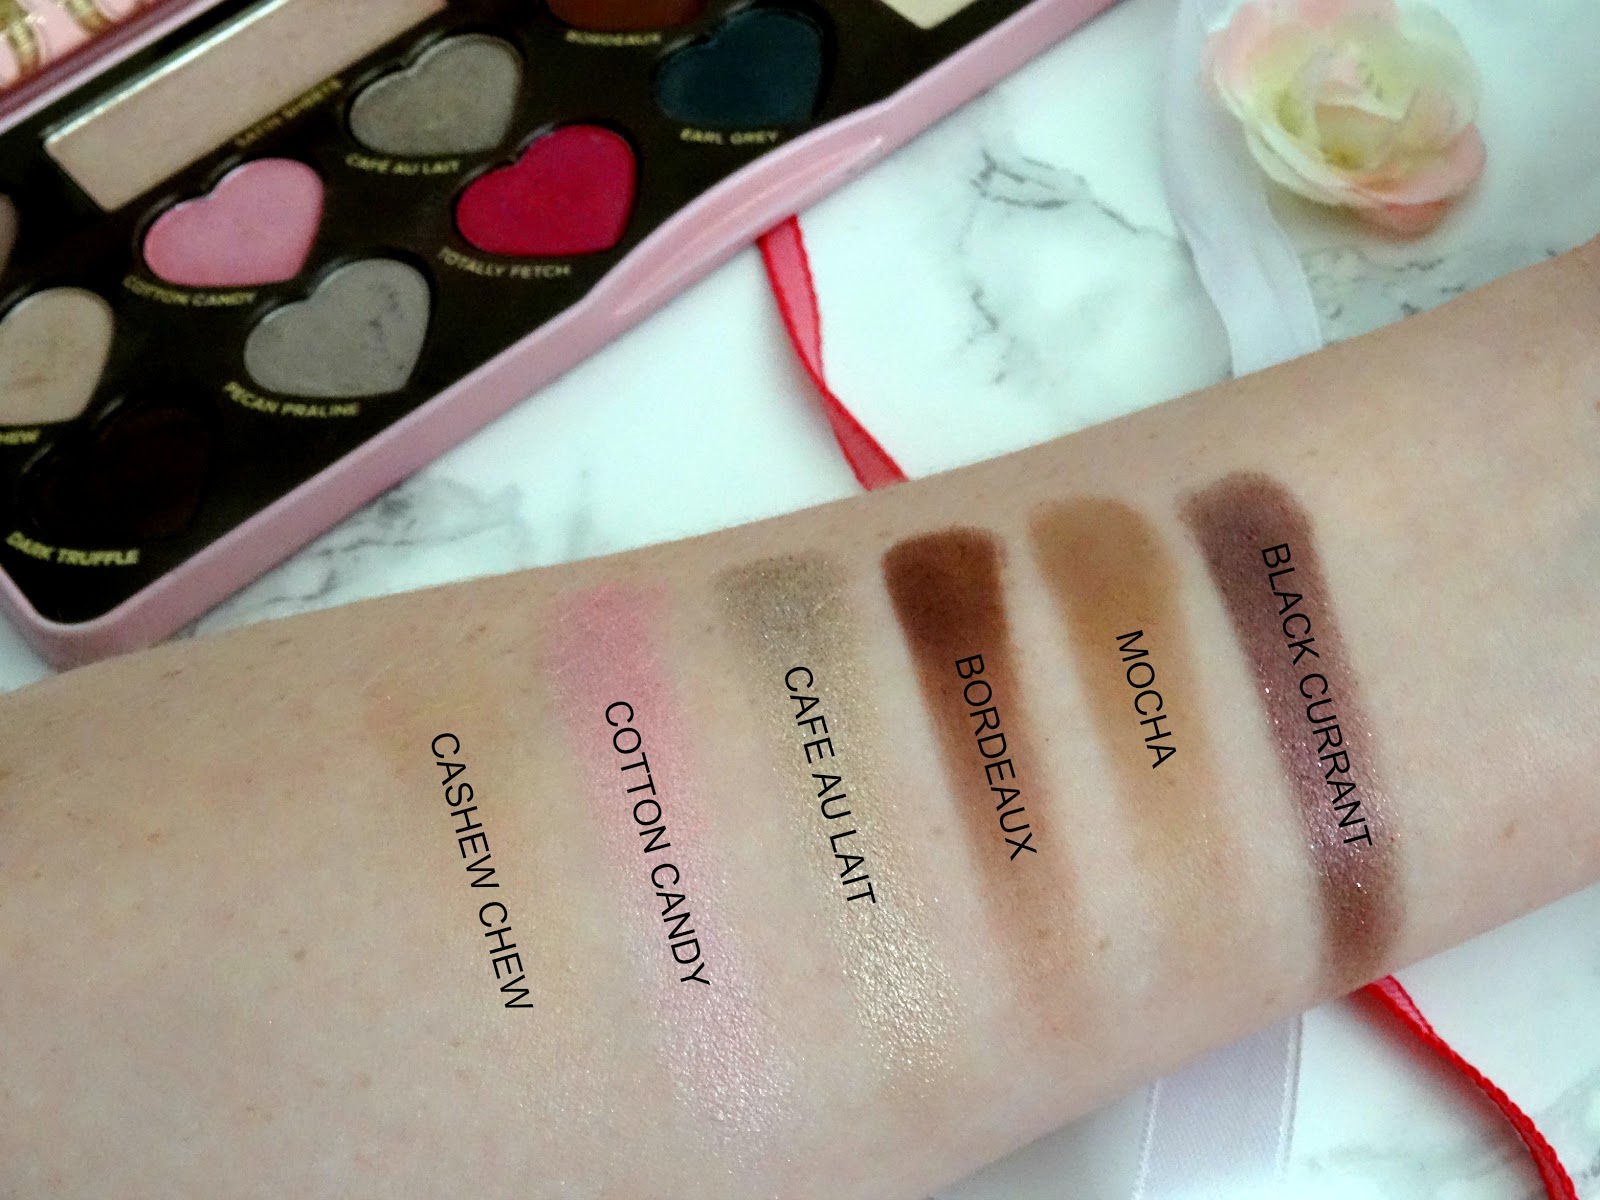 Too Faced Chocolate Bon Bons Palette Review and Swatches